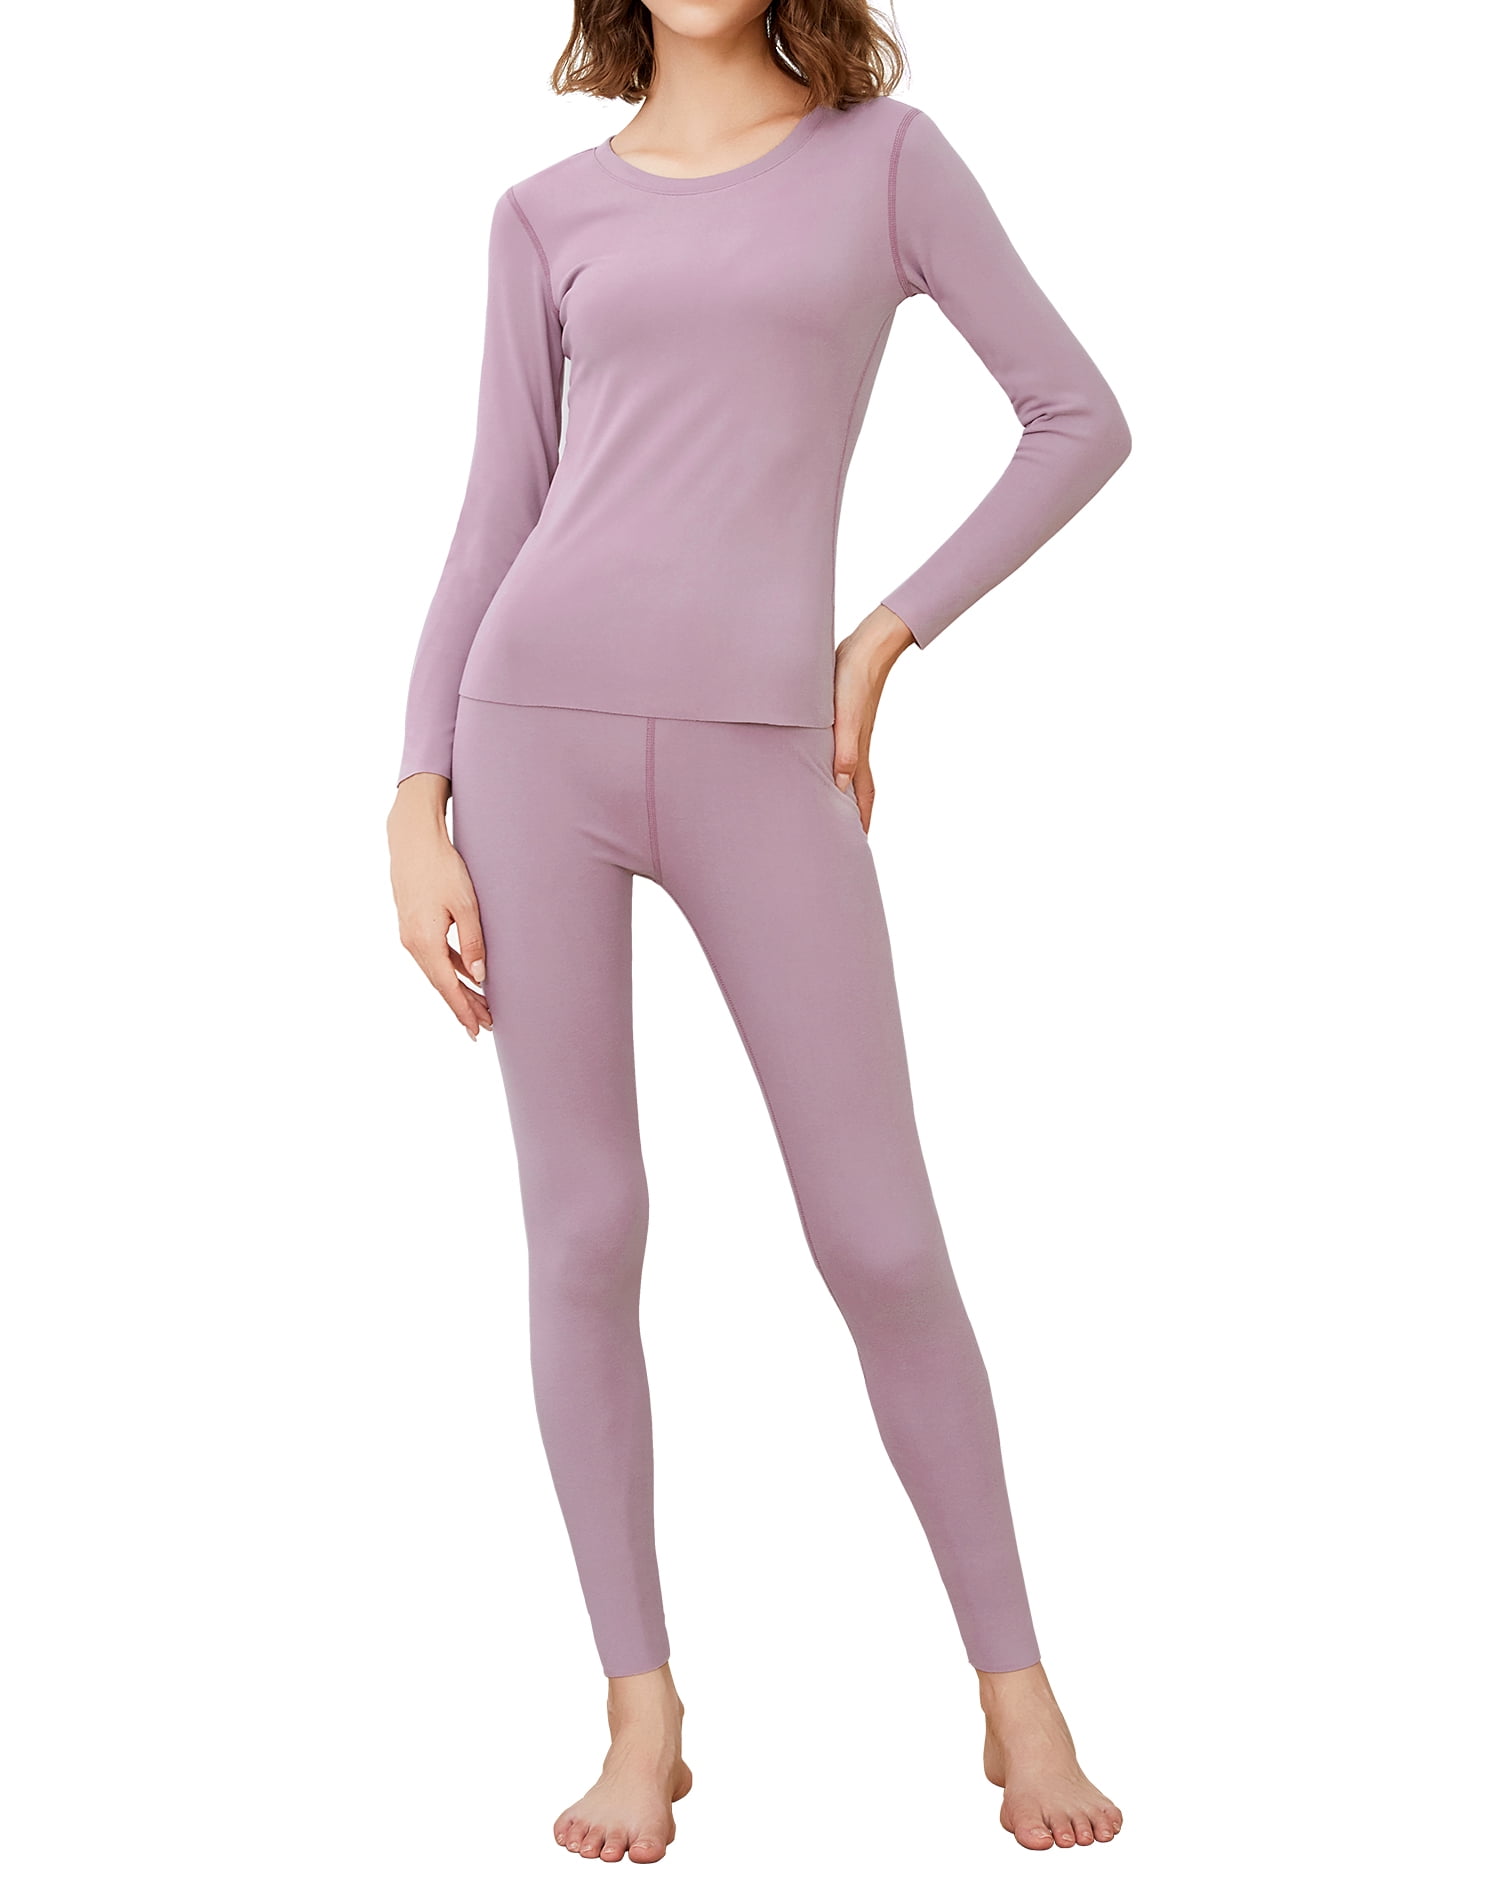 INNERSY Thermal Underwear Set for Women Top & Leggings Base Layer Thermal  Long Johns Pajamas (S, Pale Mauve)